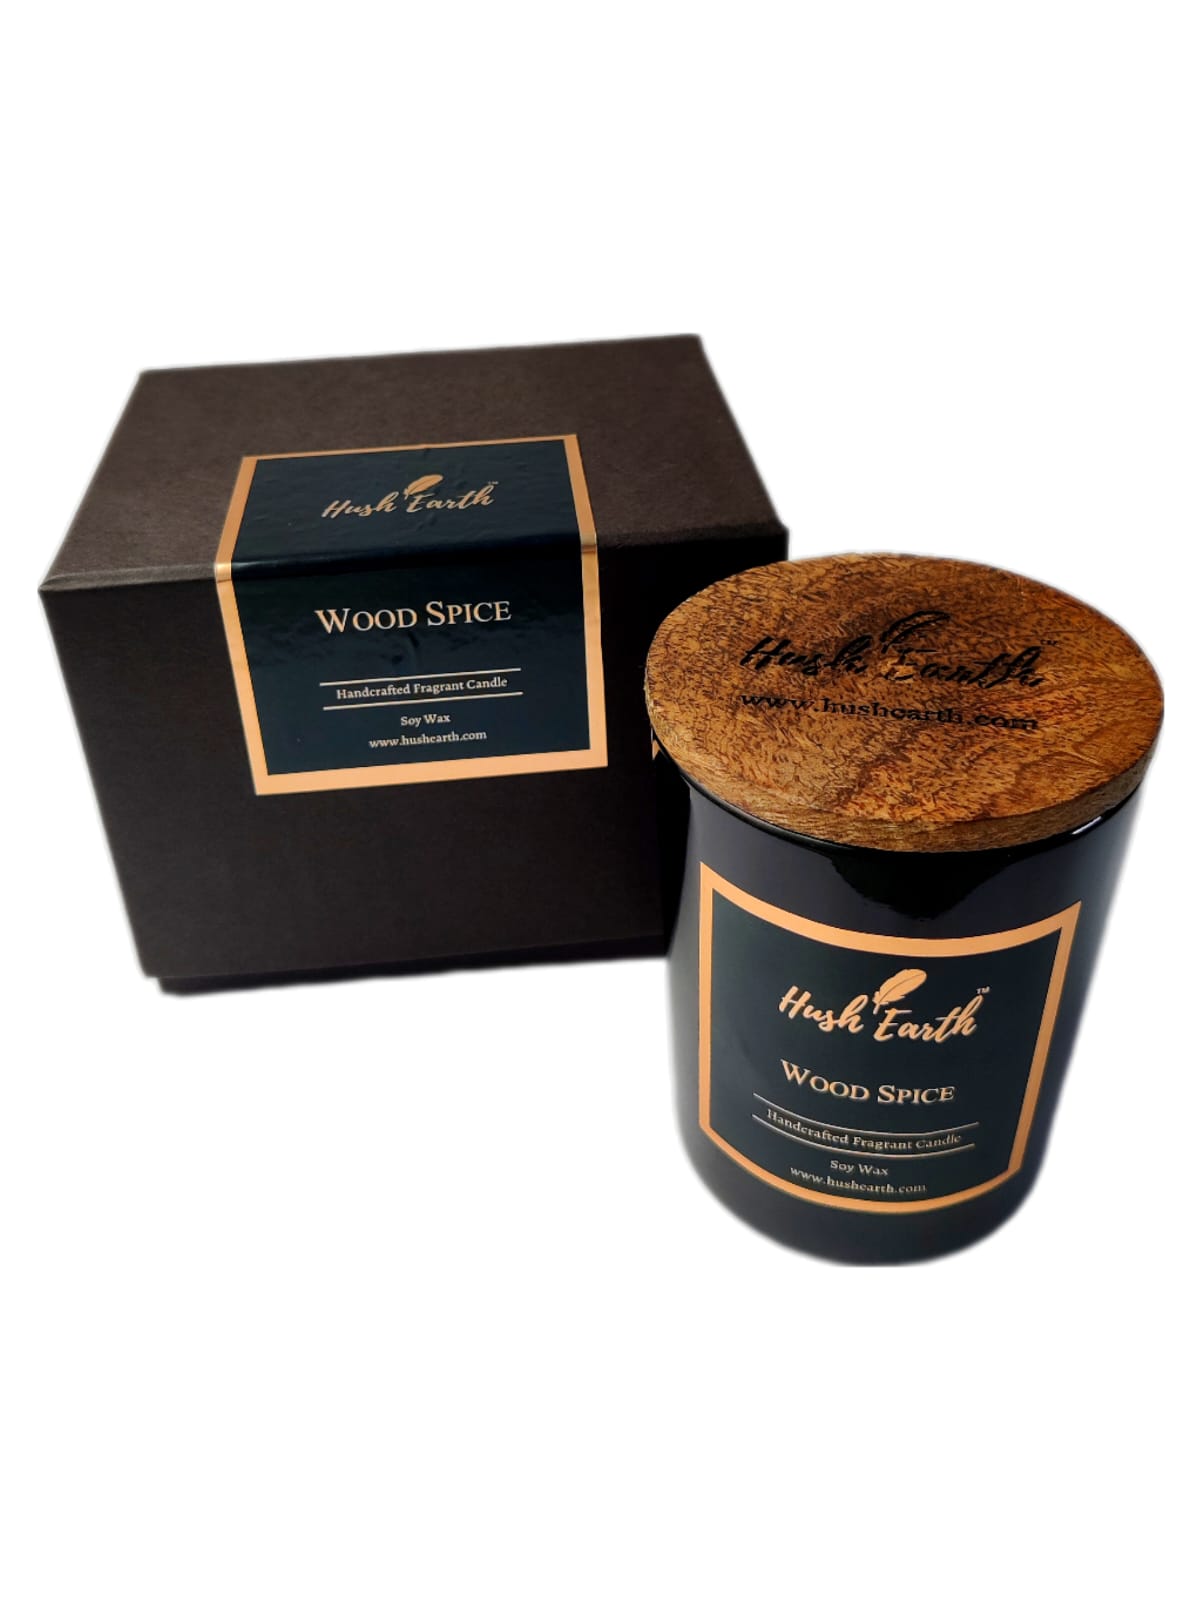 Wood Spice - Hush Earth Handcrafted Single Wick Candle